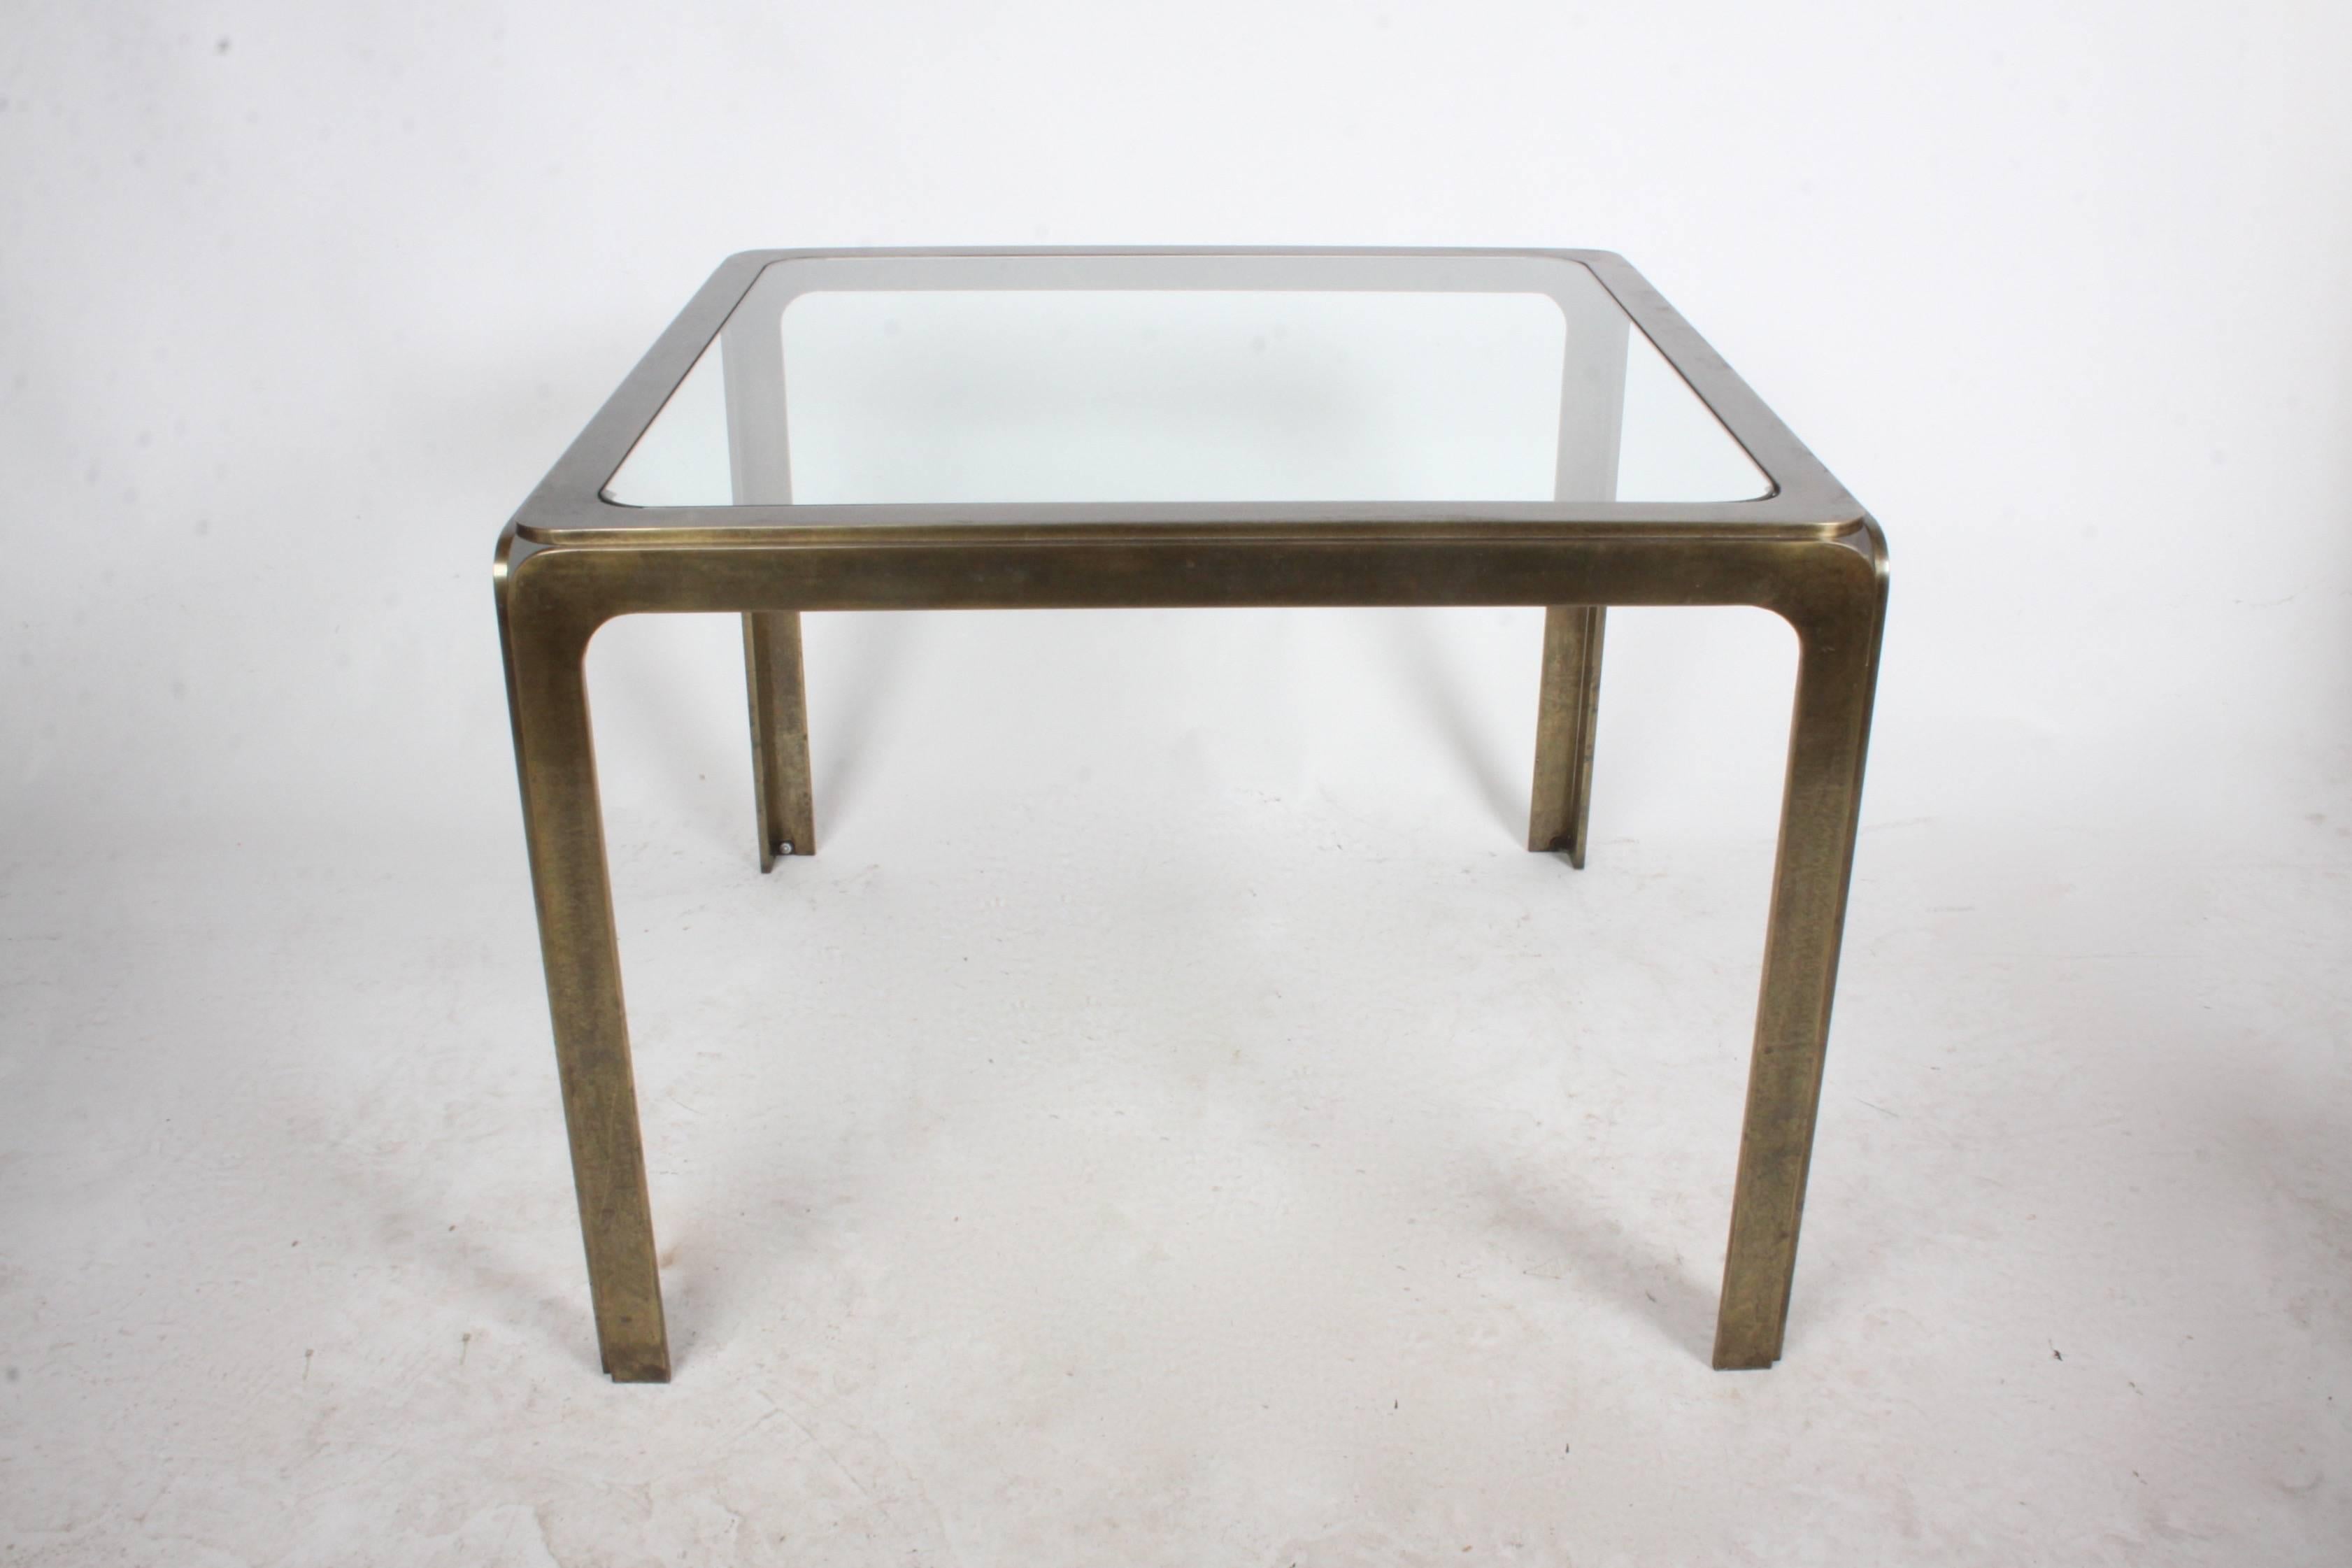 End table or occasional table in solid bronze, in the style of Mastercraft. The unique radius bronze frame forms open corners. Table also reminds me of Rodger Sprunger for Dunbar. Glass has surface scratches. Well constructed, great patina.